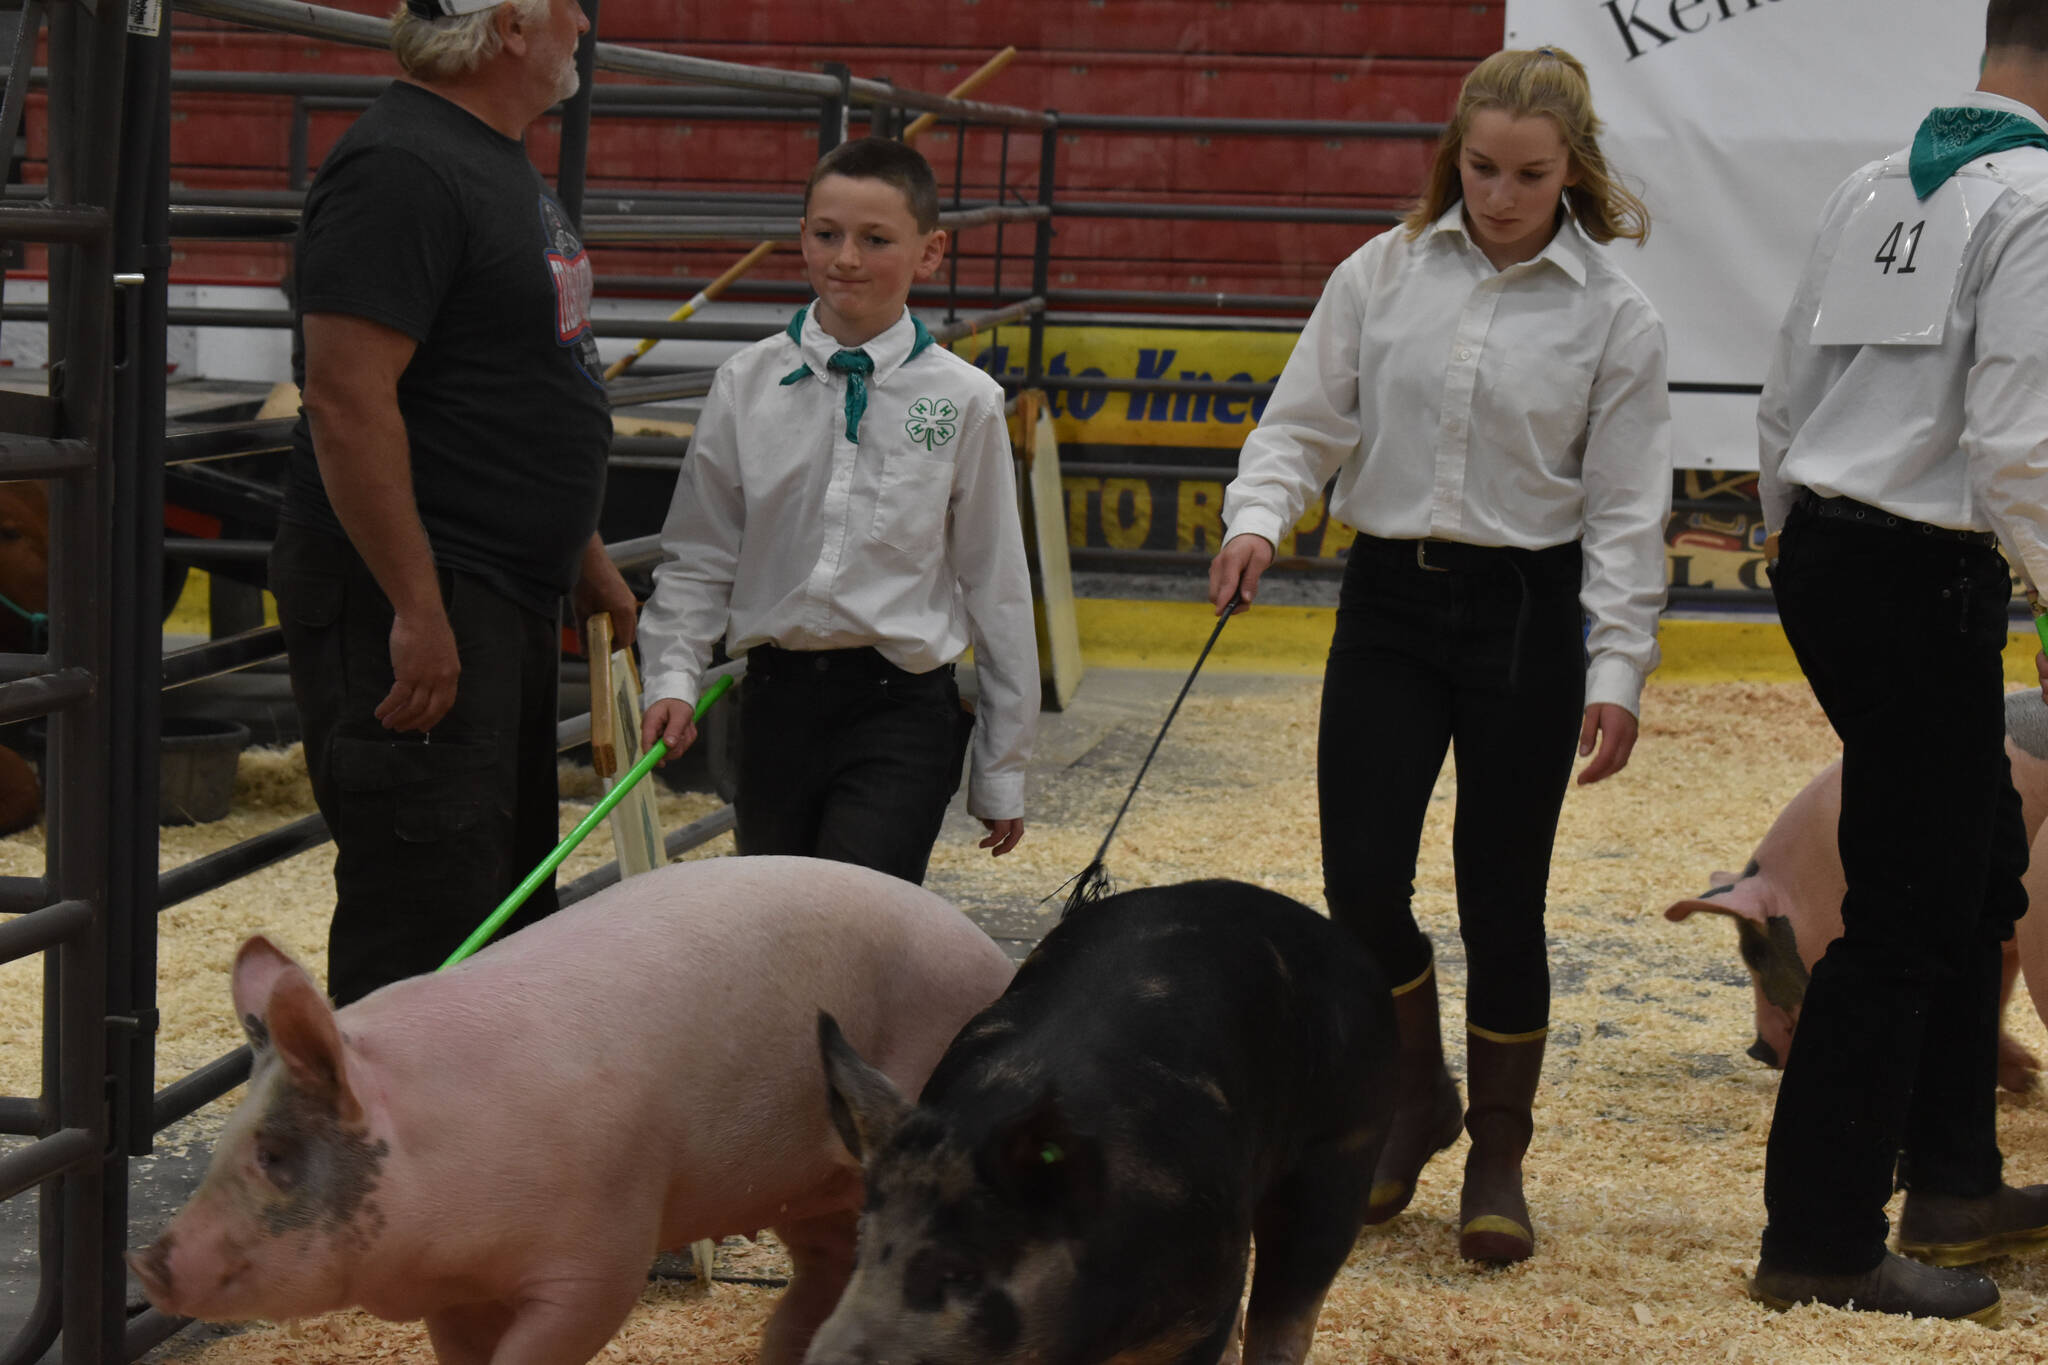 Abriella Werner shows a pig alongside another contestant at the 4-H Agriculture Expo in Soldotna, Alaska, on Aug. 5, 2022